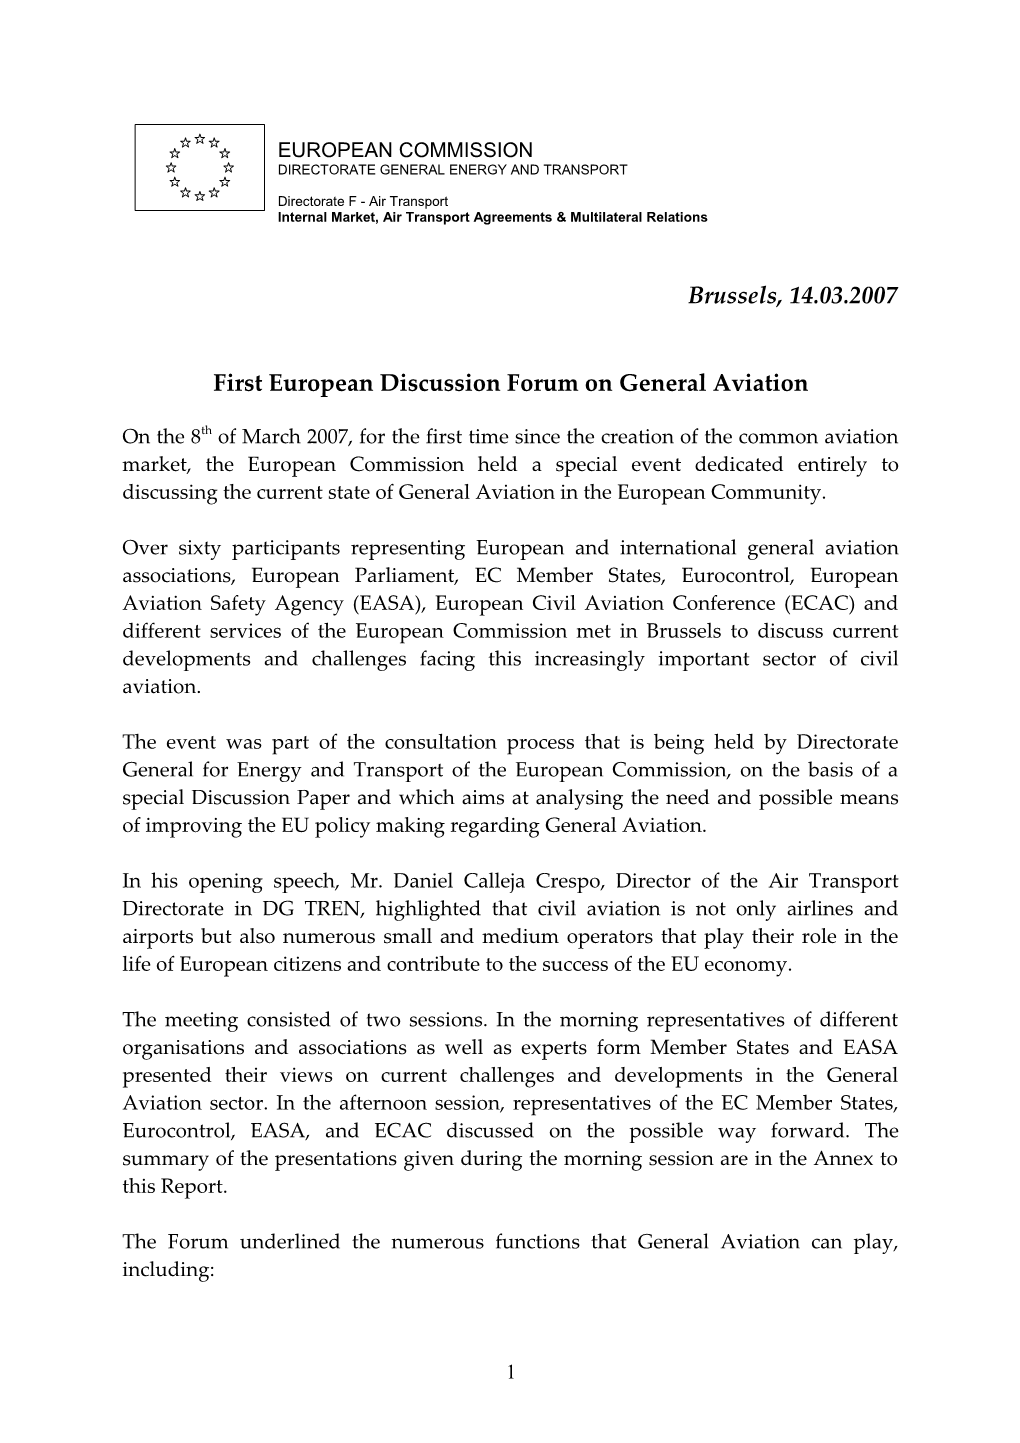 First European Discussion Forum on General Aviation